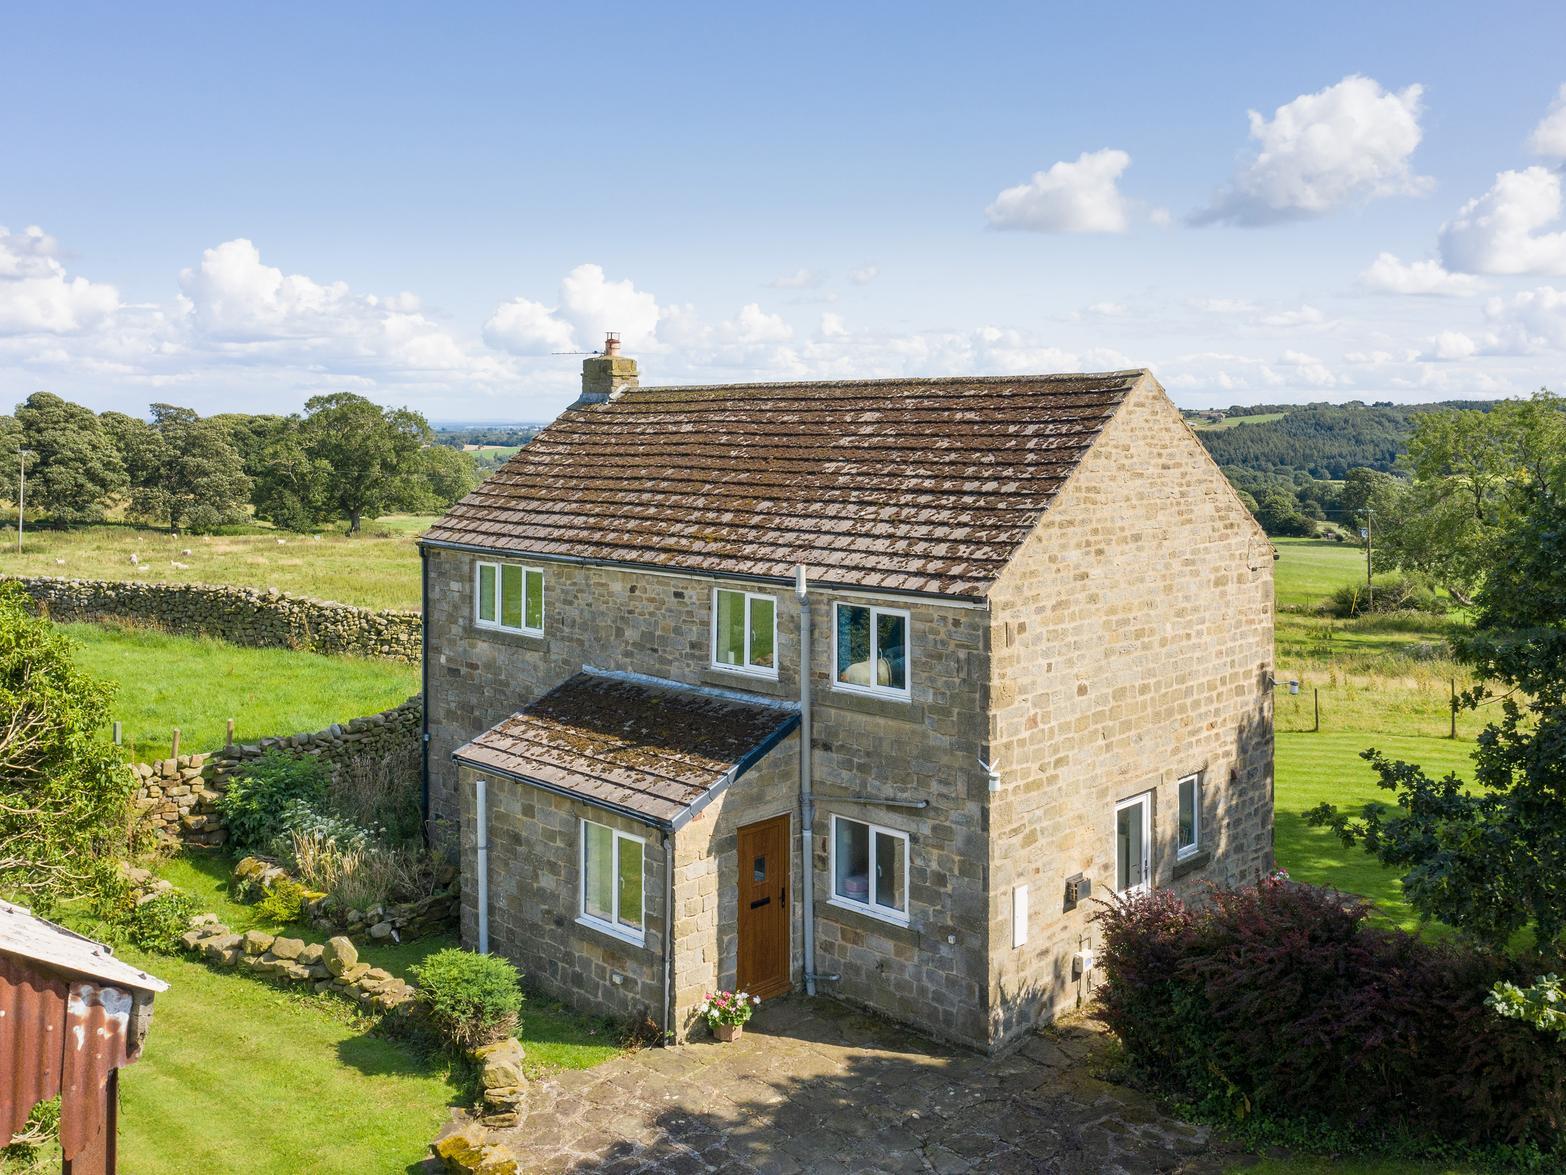 This stone built four bedroom detached family house takes full advantage of its setting and has been designed so the principal bedrooms and living rooms benefit from the panoramic views